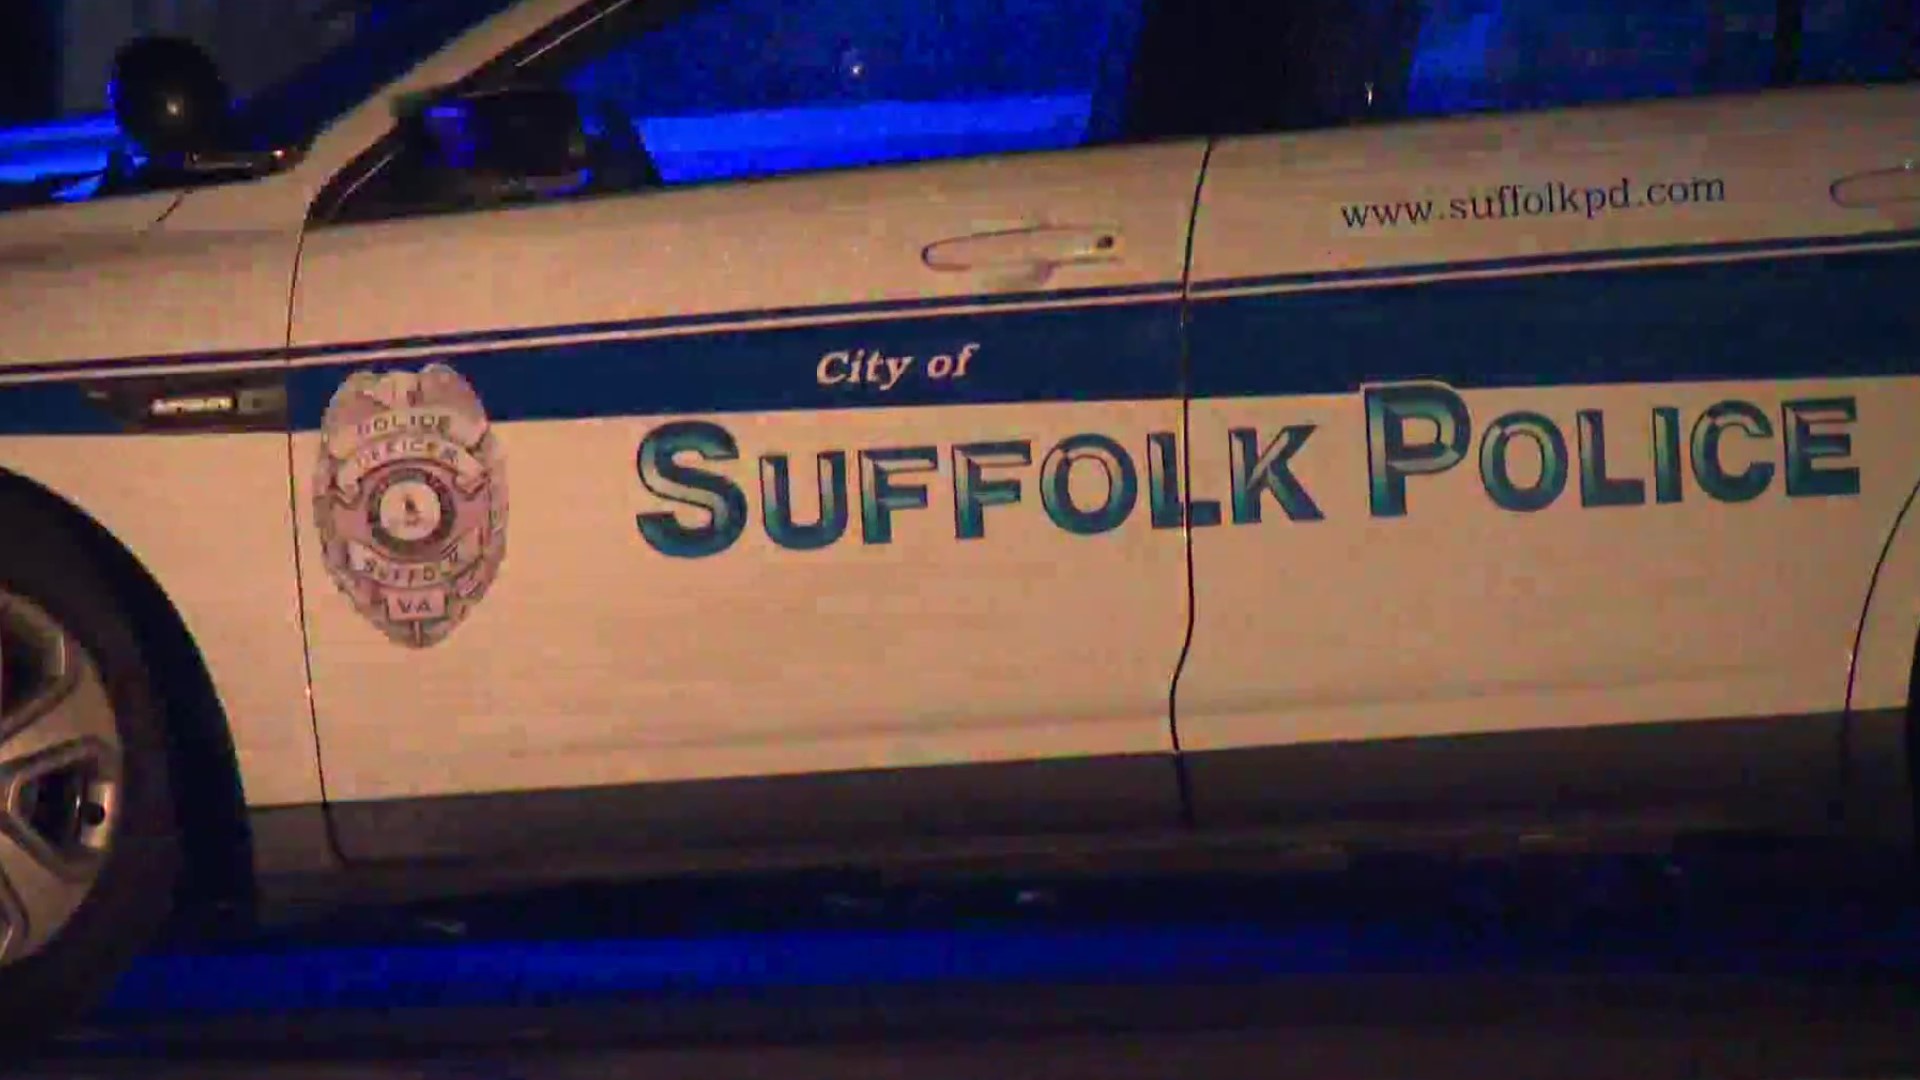 Suffolk police say they received a call reporting shots fired in the 1300 block of Blythewood Lane on Thursday just before 6:40 p.m.